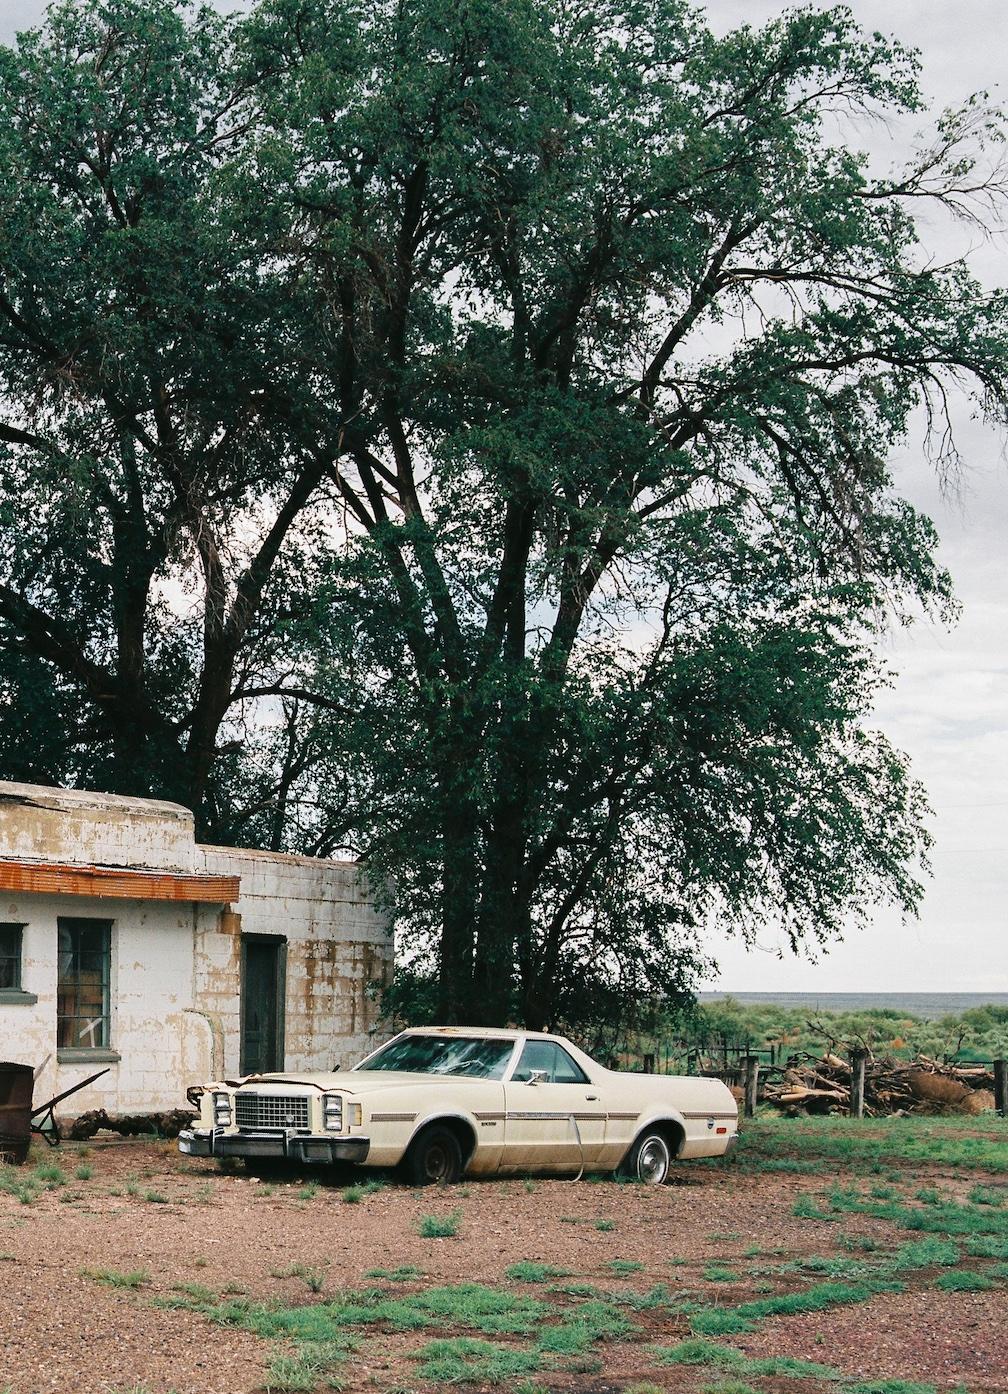 American Vintage, 2022, Hereford, NM, USA - Photograph by Philippe Blayo